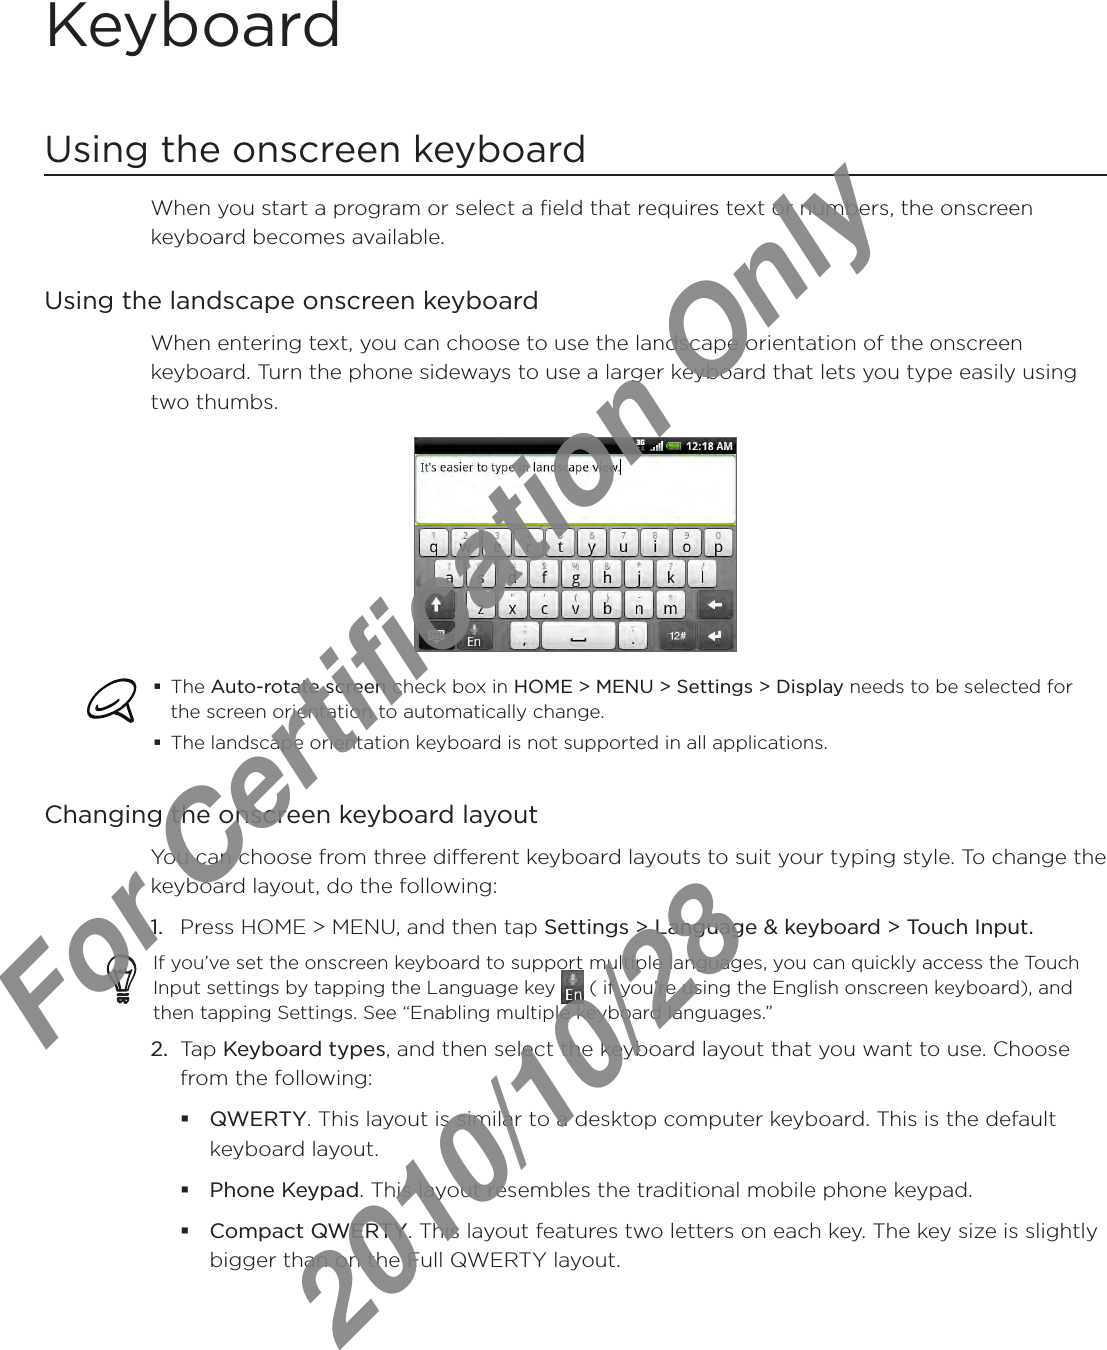 KeyboardUsing the onscreen keyboardWhen you start a program or select a field that requires text or numbers, the onscreen keyboard becomes available.Using the landscape onscreen keyboardWhen entering text, you can choose to use the landscape orientation of the onscreen keyboard. Turn the phone sideways to use a larger keyboard that lets you type easily using two thumbs.The Auto-rotate screen check box in HOME &gt; MENU &gt; Settings &gt; Display needs to be selected for the screen orientation to automatically change.The landscape orientation keyboard is not supported in all applications. Changing the onscreen keyboard layoutYou can choose from three different keyboard layouts to suit your typing style. To change the keyboard layout, do the following:1.  Press HOME &gt; MENU, and then tap Settings &gt; Language &amp; keyboard &gt; Touch Input.If you’ve set the onscreen keyboard to support multiple languages, you can quickly access the Touch Input settings by tapping the Language key   ( if you’re using the English onscreen keyboard), and then tapping Settings. See “Enabling multiple keyboard languages.”2.  Tap Keyboard types, and then select the keyboard layout that you want to use. Choose from the following:QWERTY. This layout is similar to a desktop computer keyboard. This is the default keyboard layout.Phone Keypad. This layout resembles the traditional mobile phone keypad.Compact QWERTY. This layout features two letters on each key. The key size is slightly bigger than on the Full QWERTY layout.For Certification Only   2010/10/28